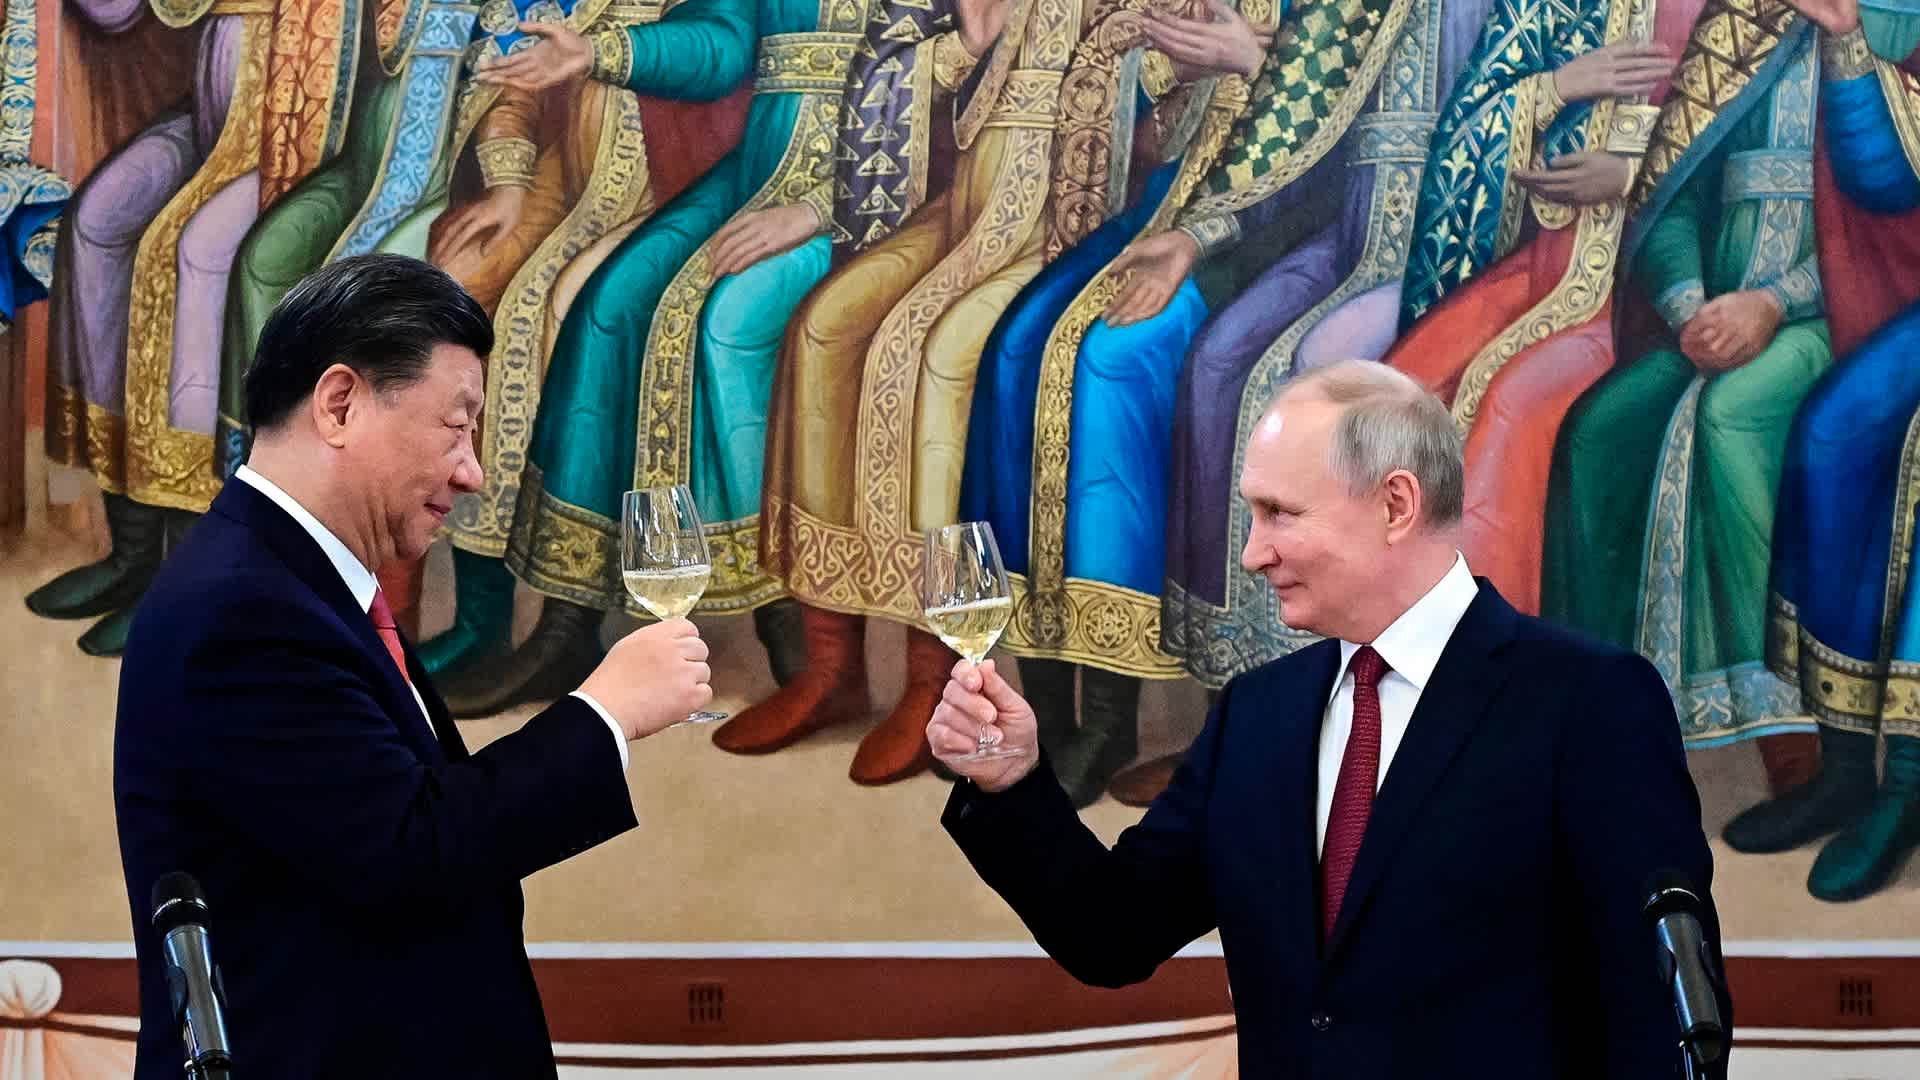 Live news updates from March 21: Putin praises China’s peace plan, Credit Suisse bonuses held back